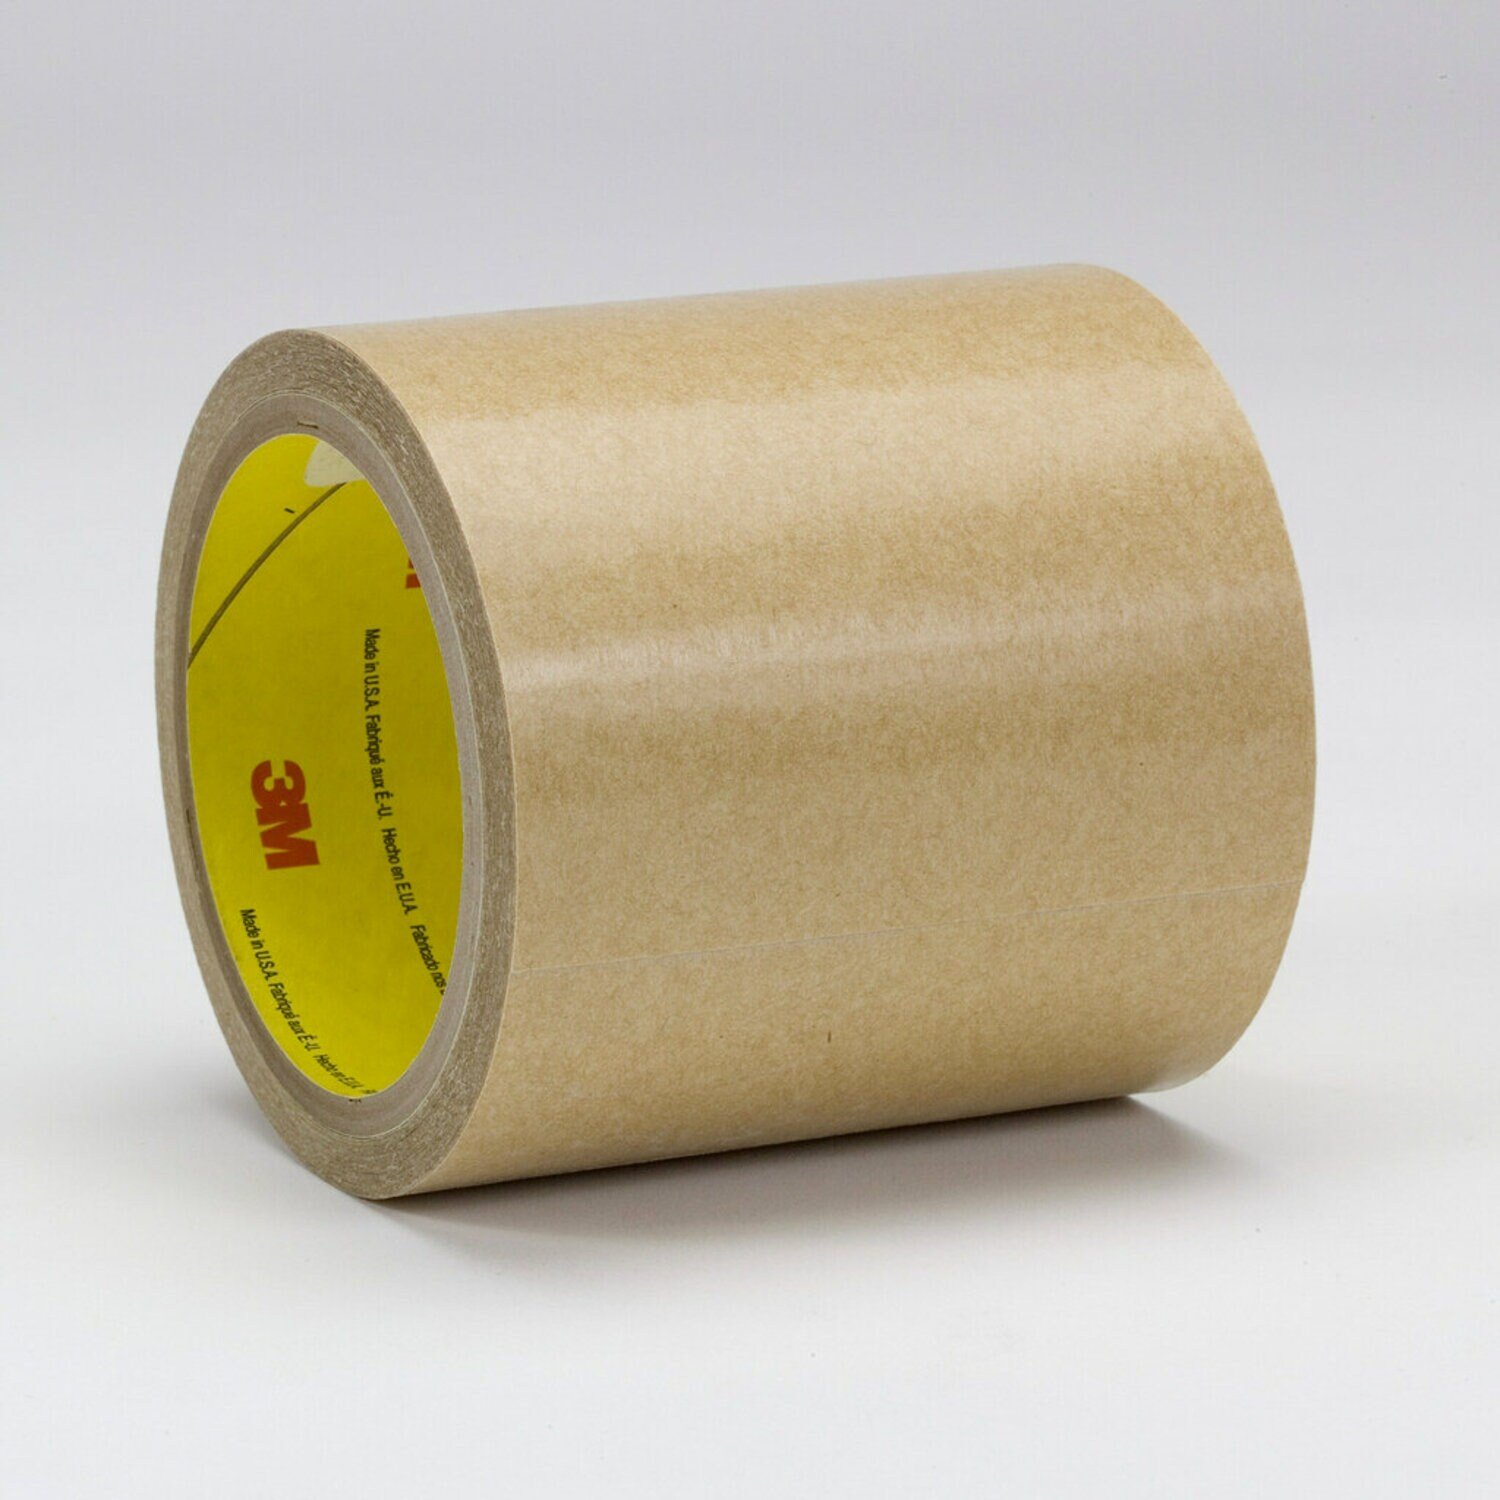 7010372838 - 3M Adhesive Transfer Tape 950, Clear, 3/4 in x 180 yd, 5 mil, 12 rolls
per case